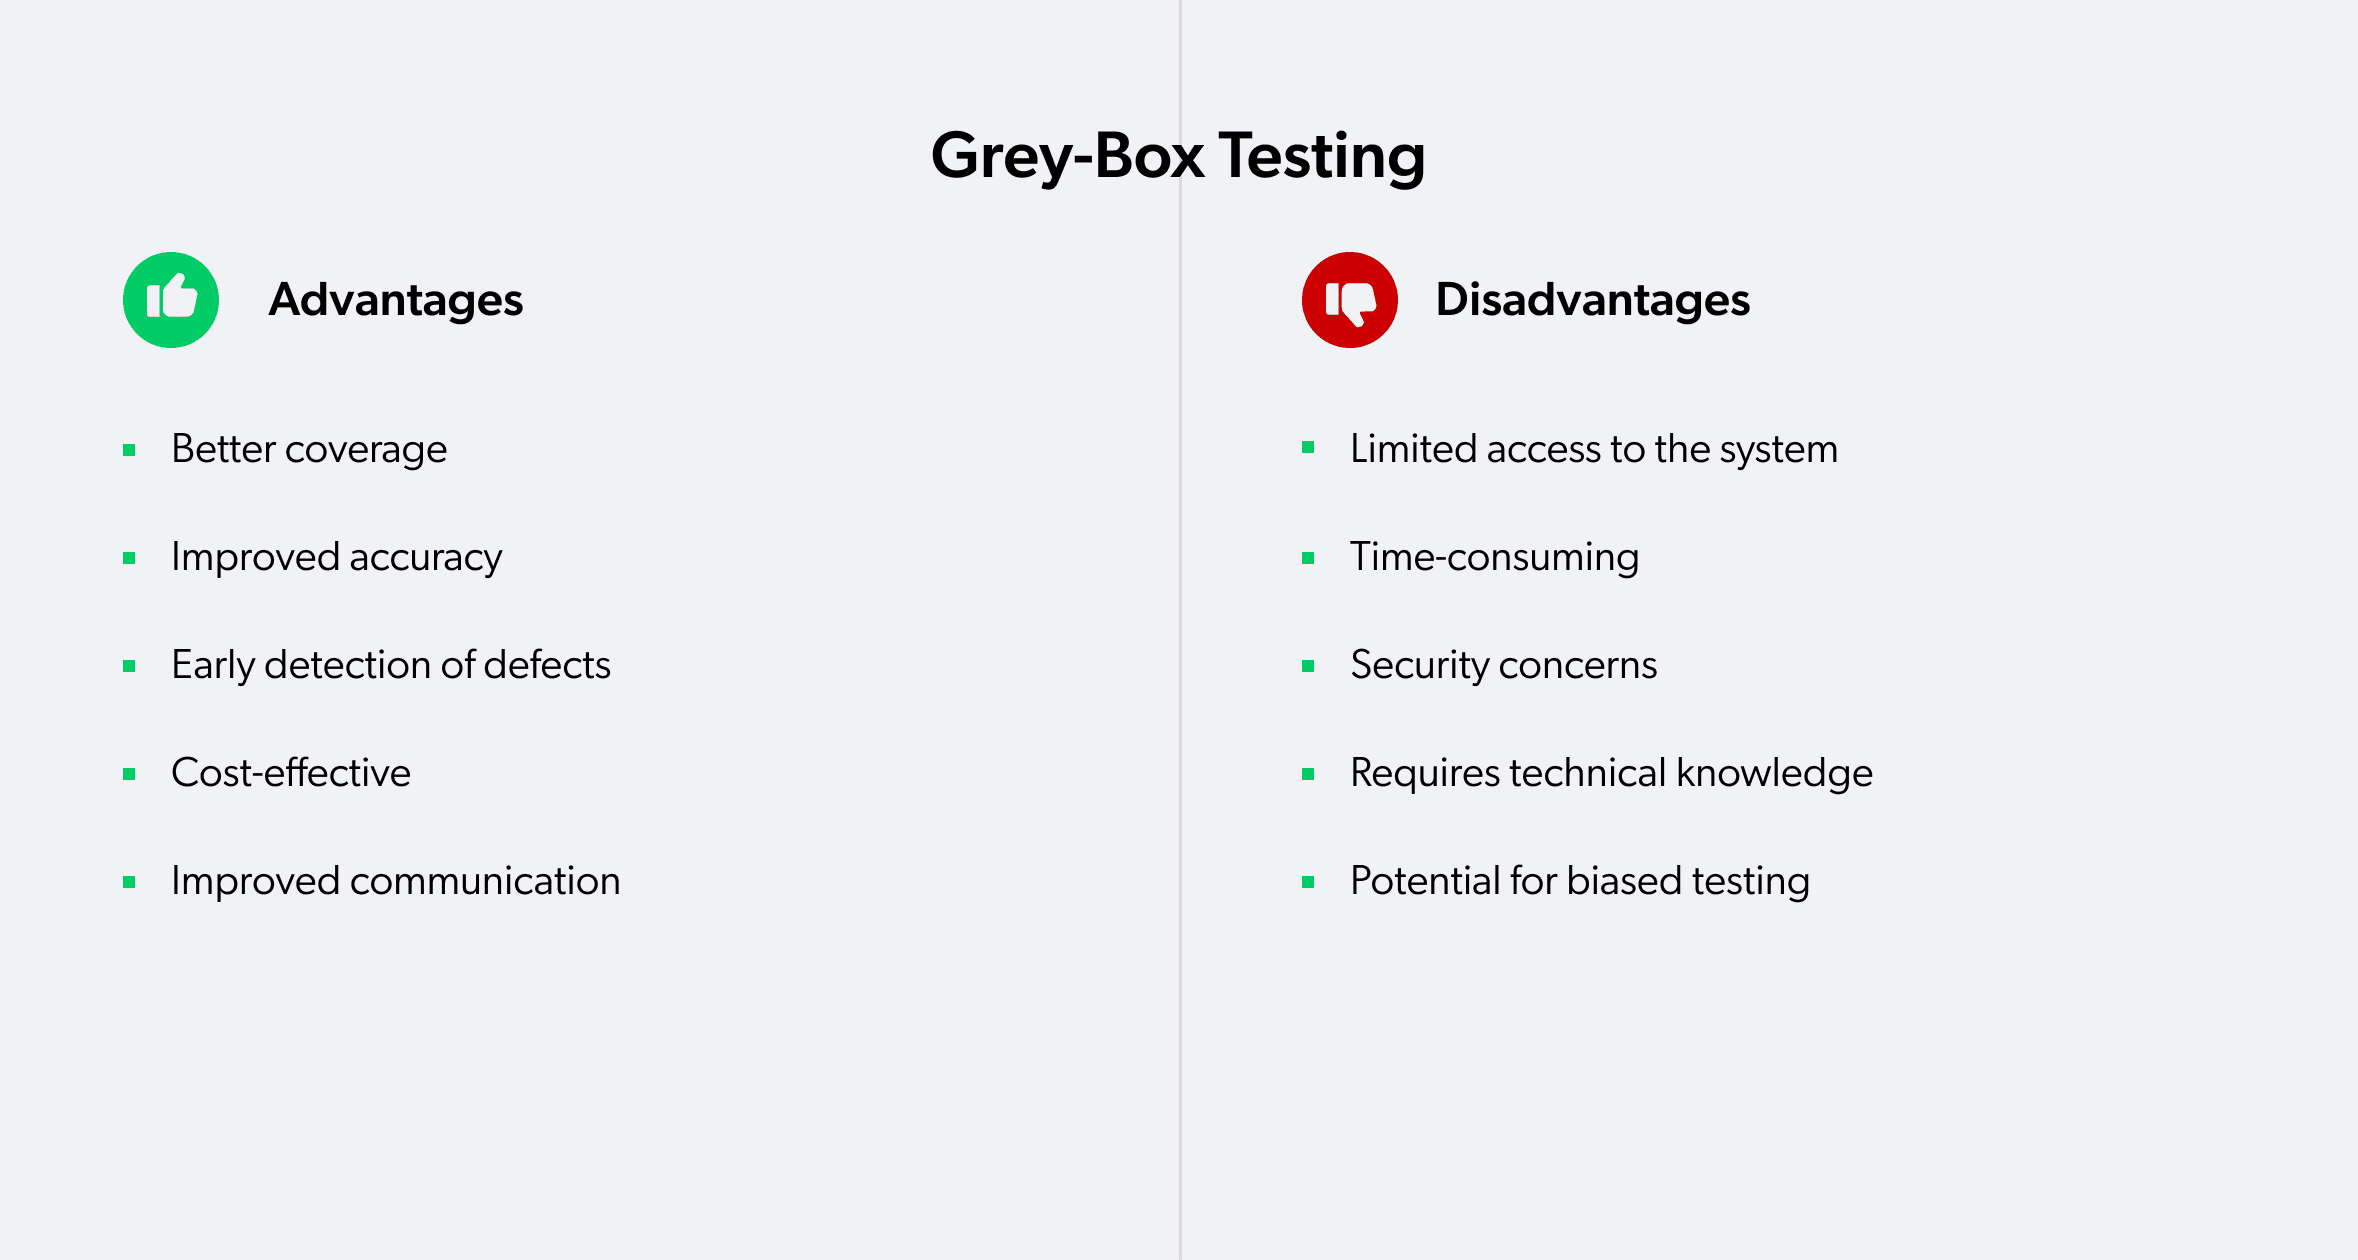 grey-box testing pros and cons